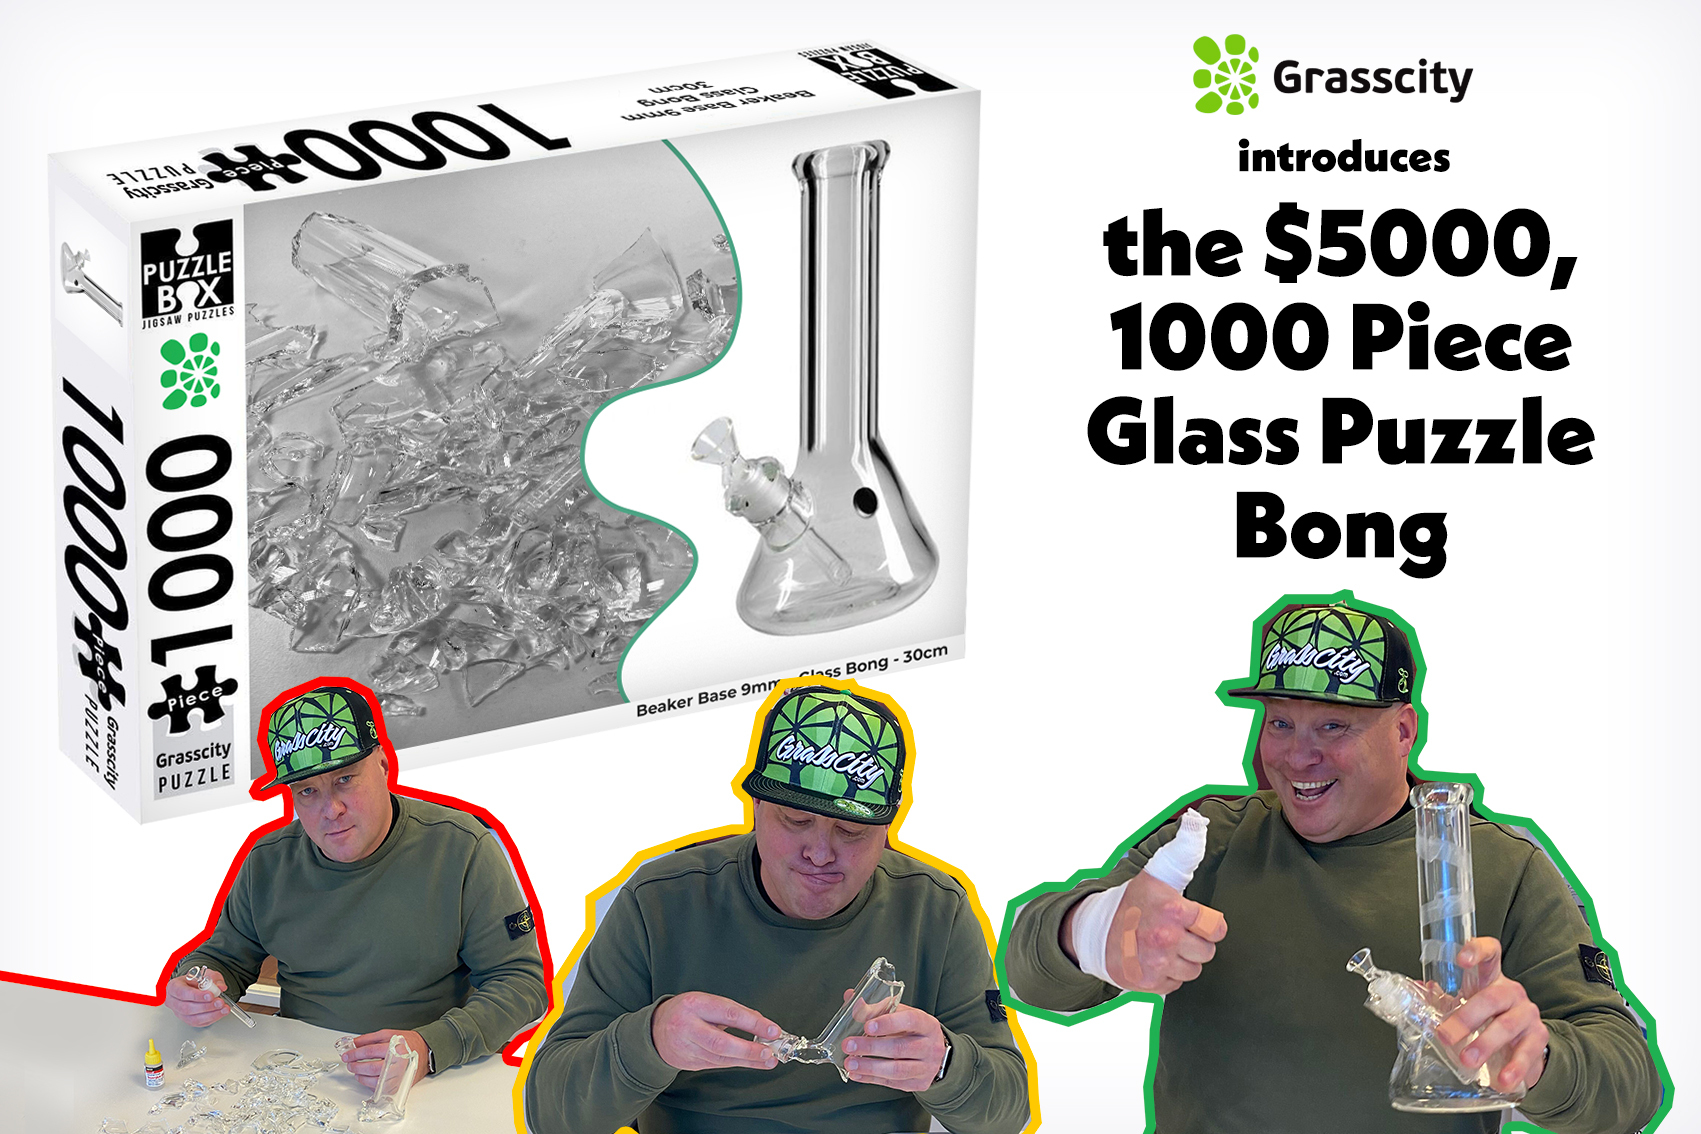 Grasscity introduces the 5000USD, 1000 Piece Glass Puzzle Bong